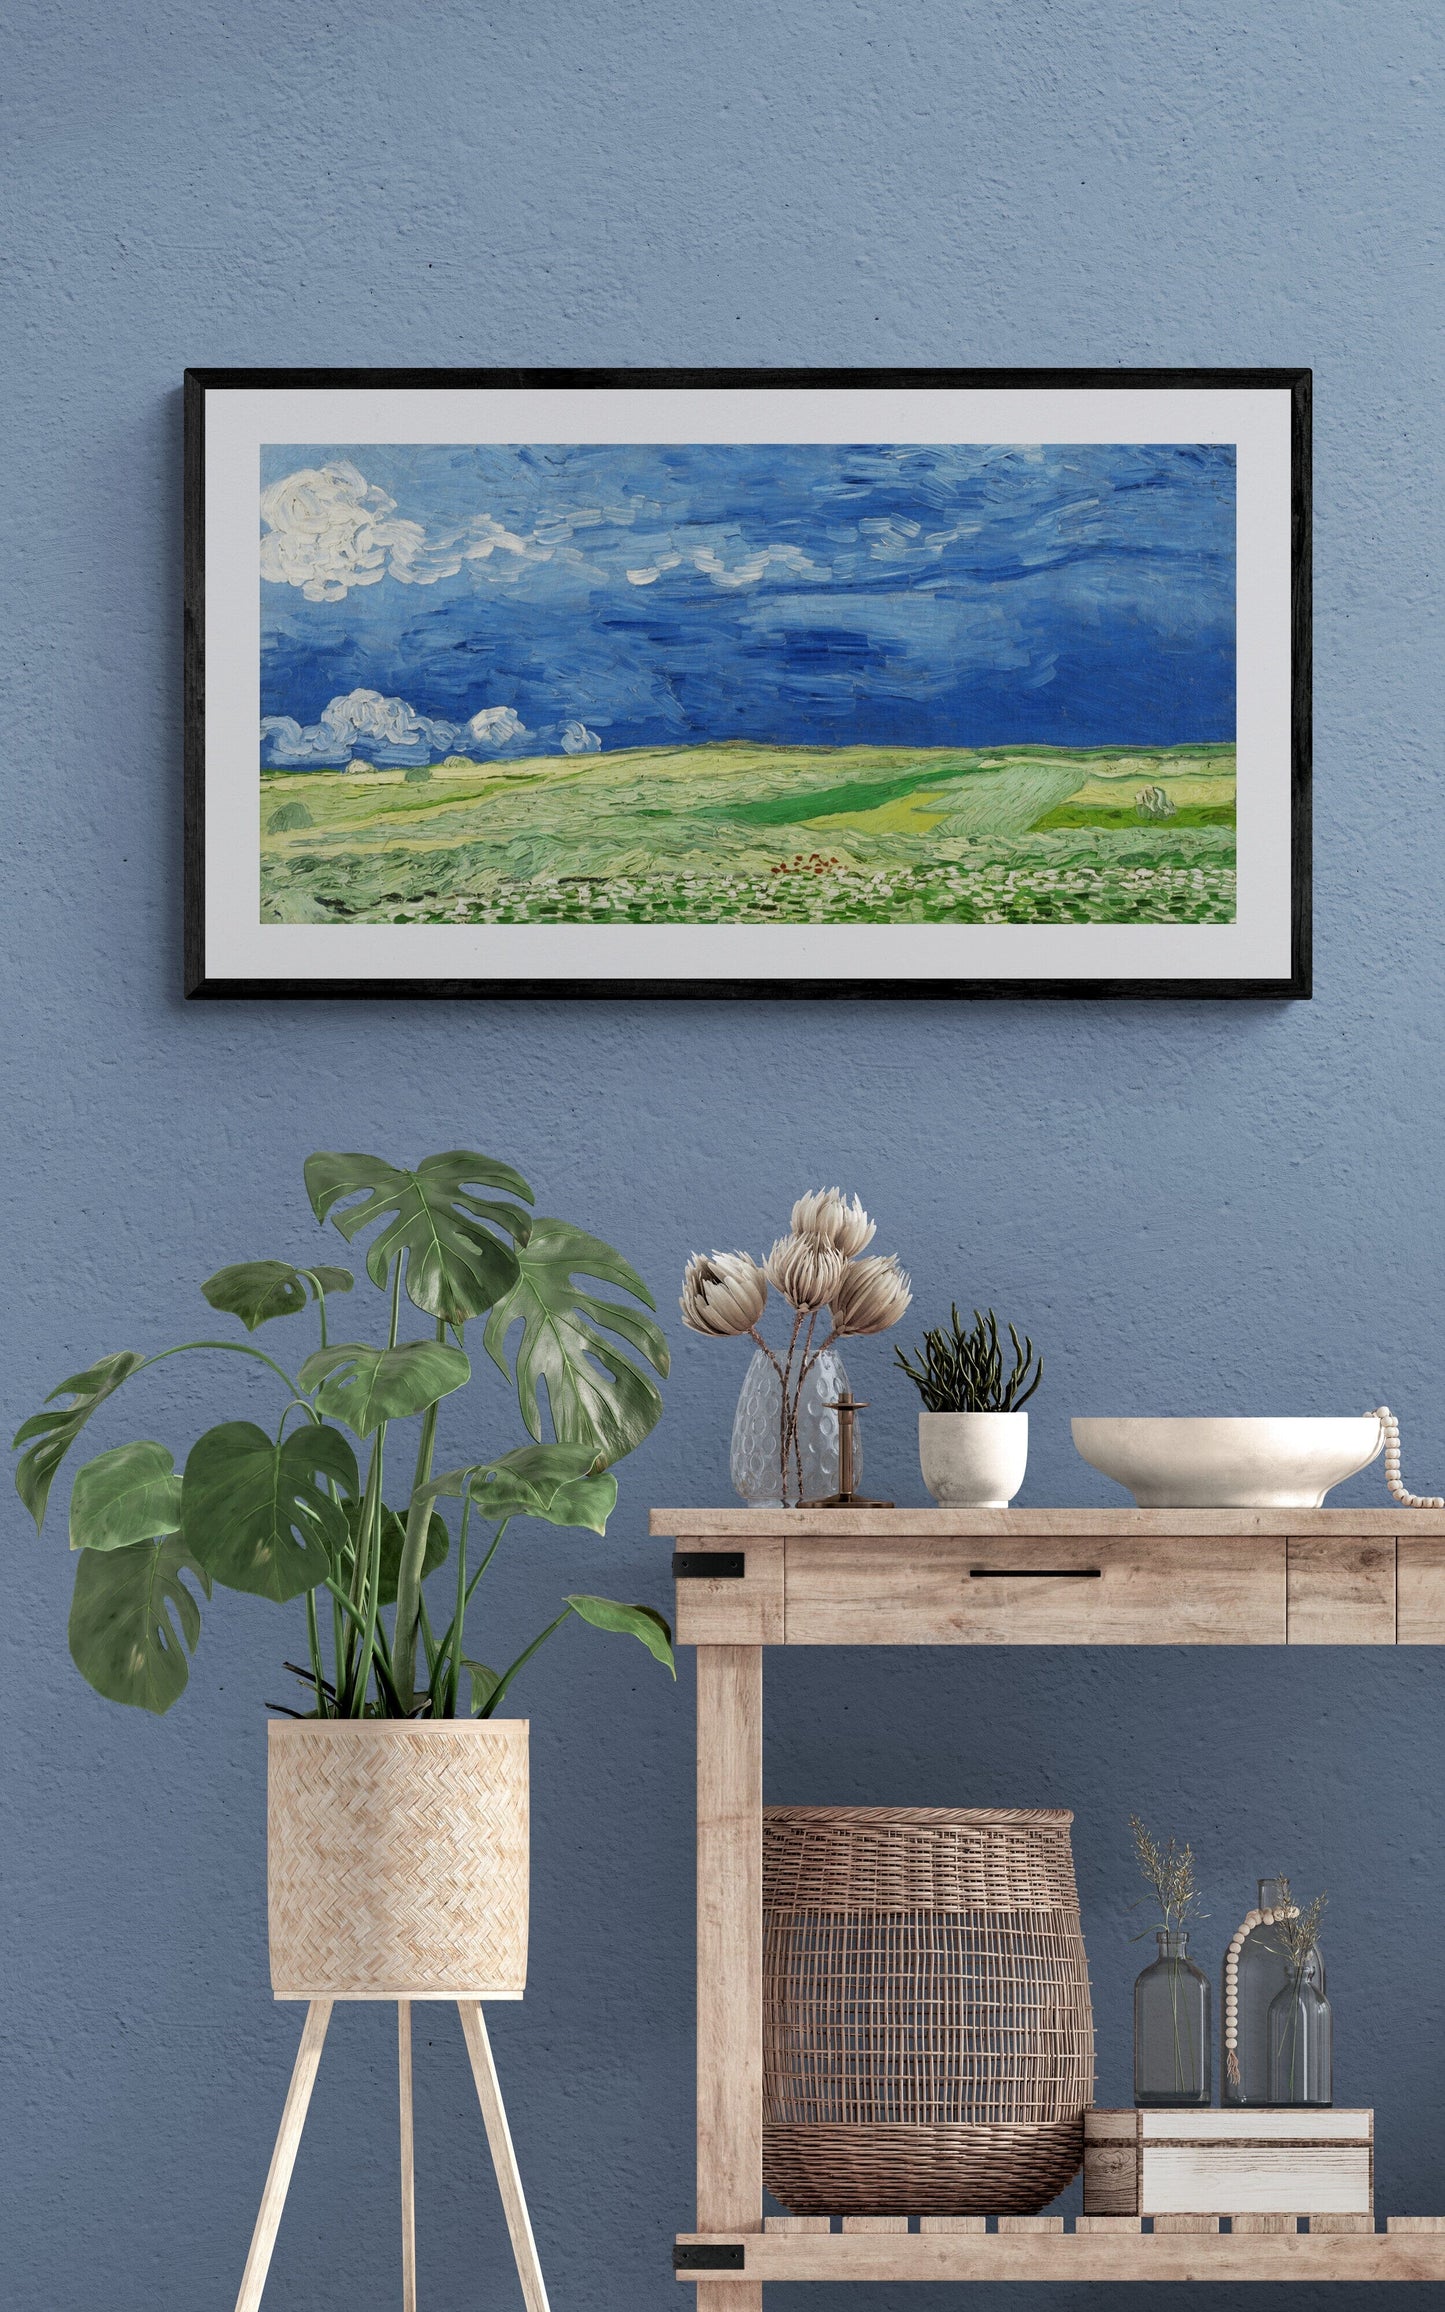 Van Gogh painting of a wheat field artwork (1890s) Posters, Prints, & Visual Artwork The Trumpet Shop   